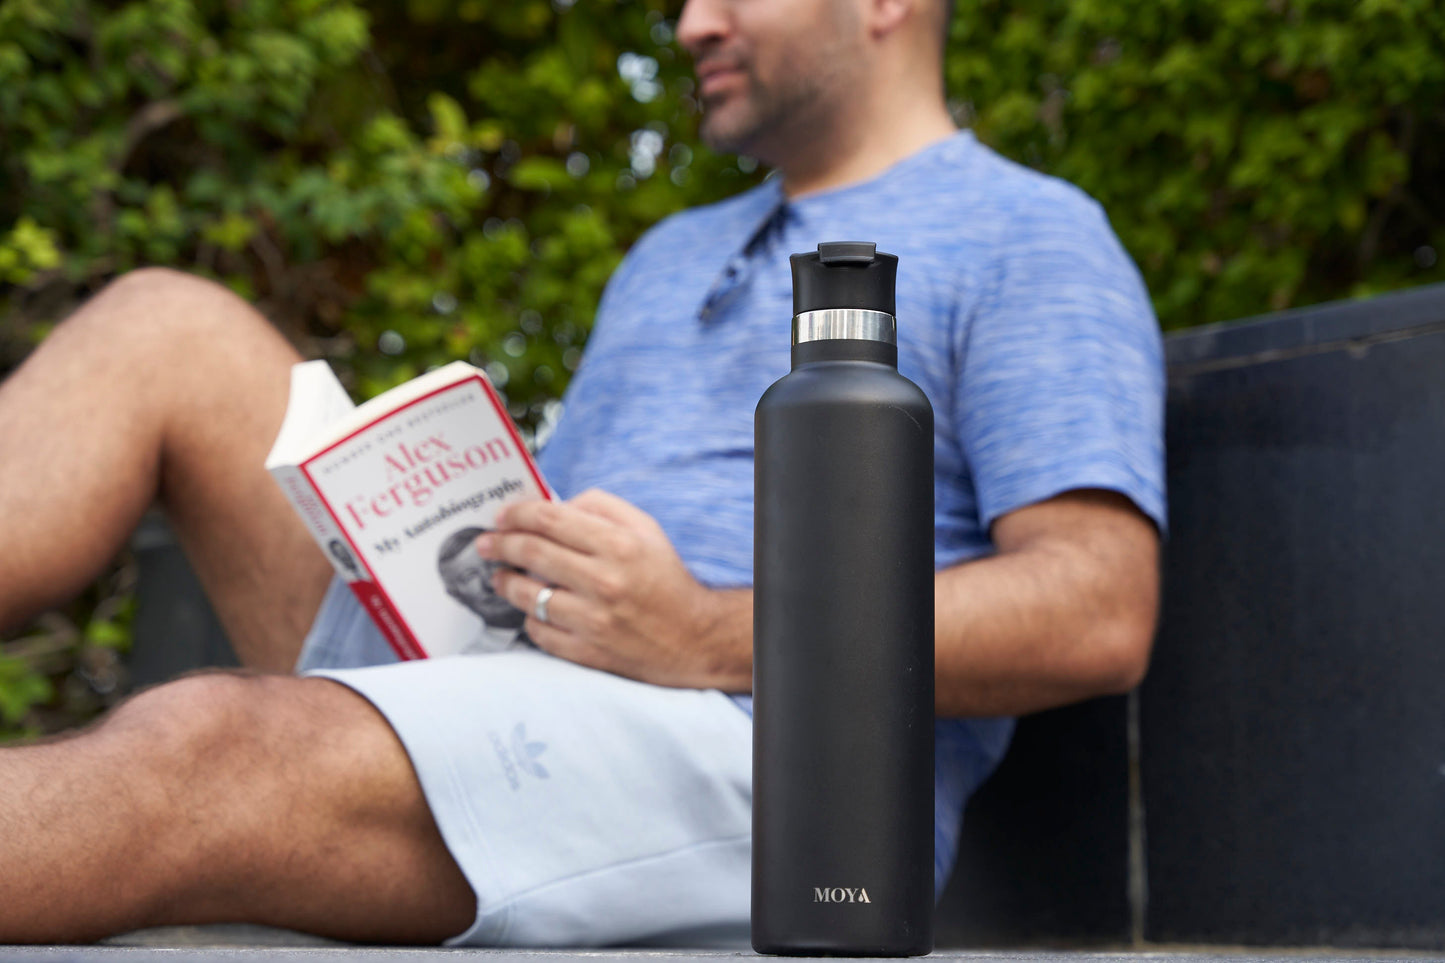 Moya "Coral Reef" 1L Insulated Sustainable Water Bottle - BBQ DXB